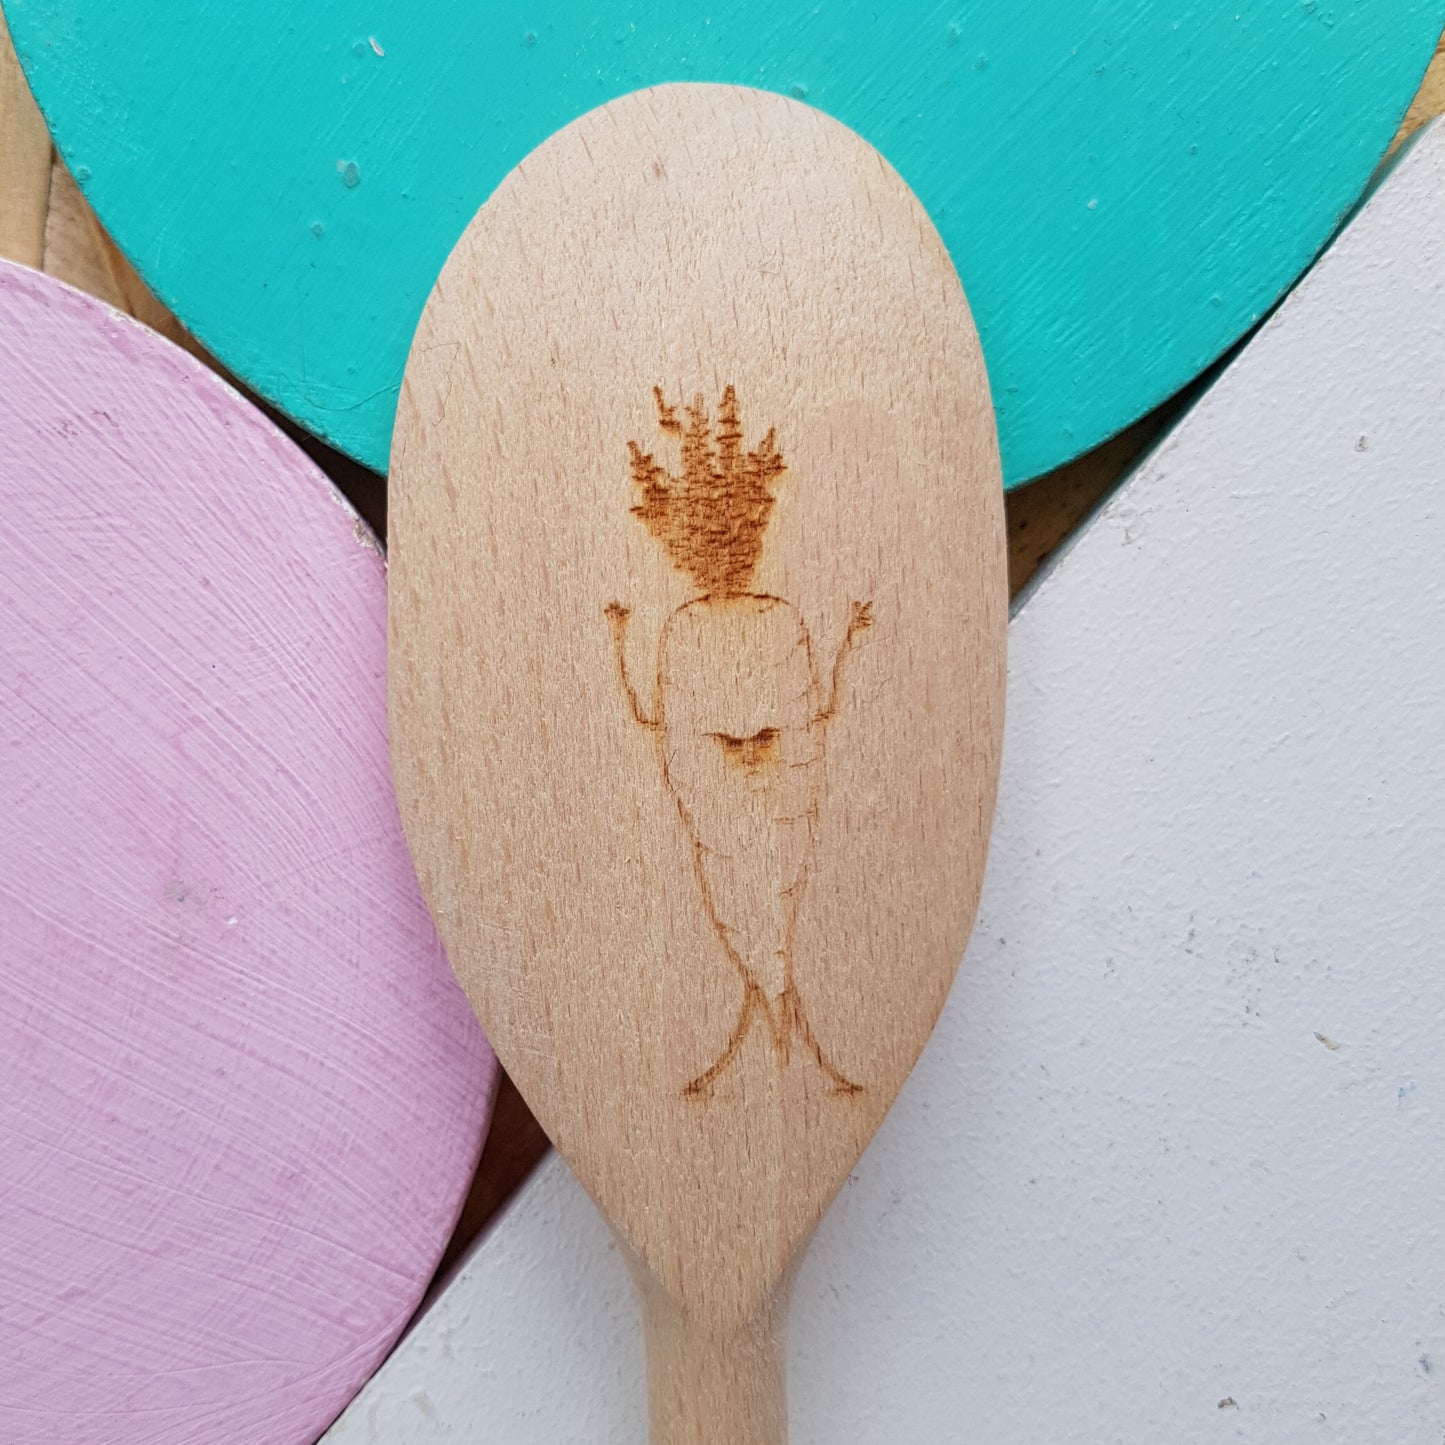 Furious Vegetable Army Wooden Spoon